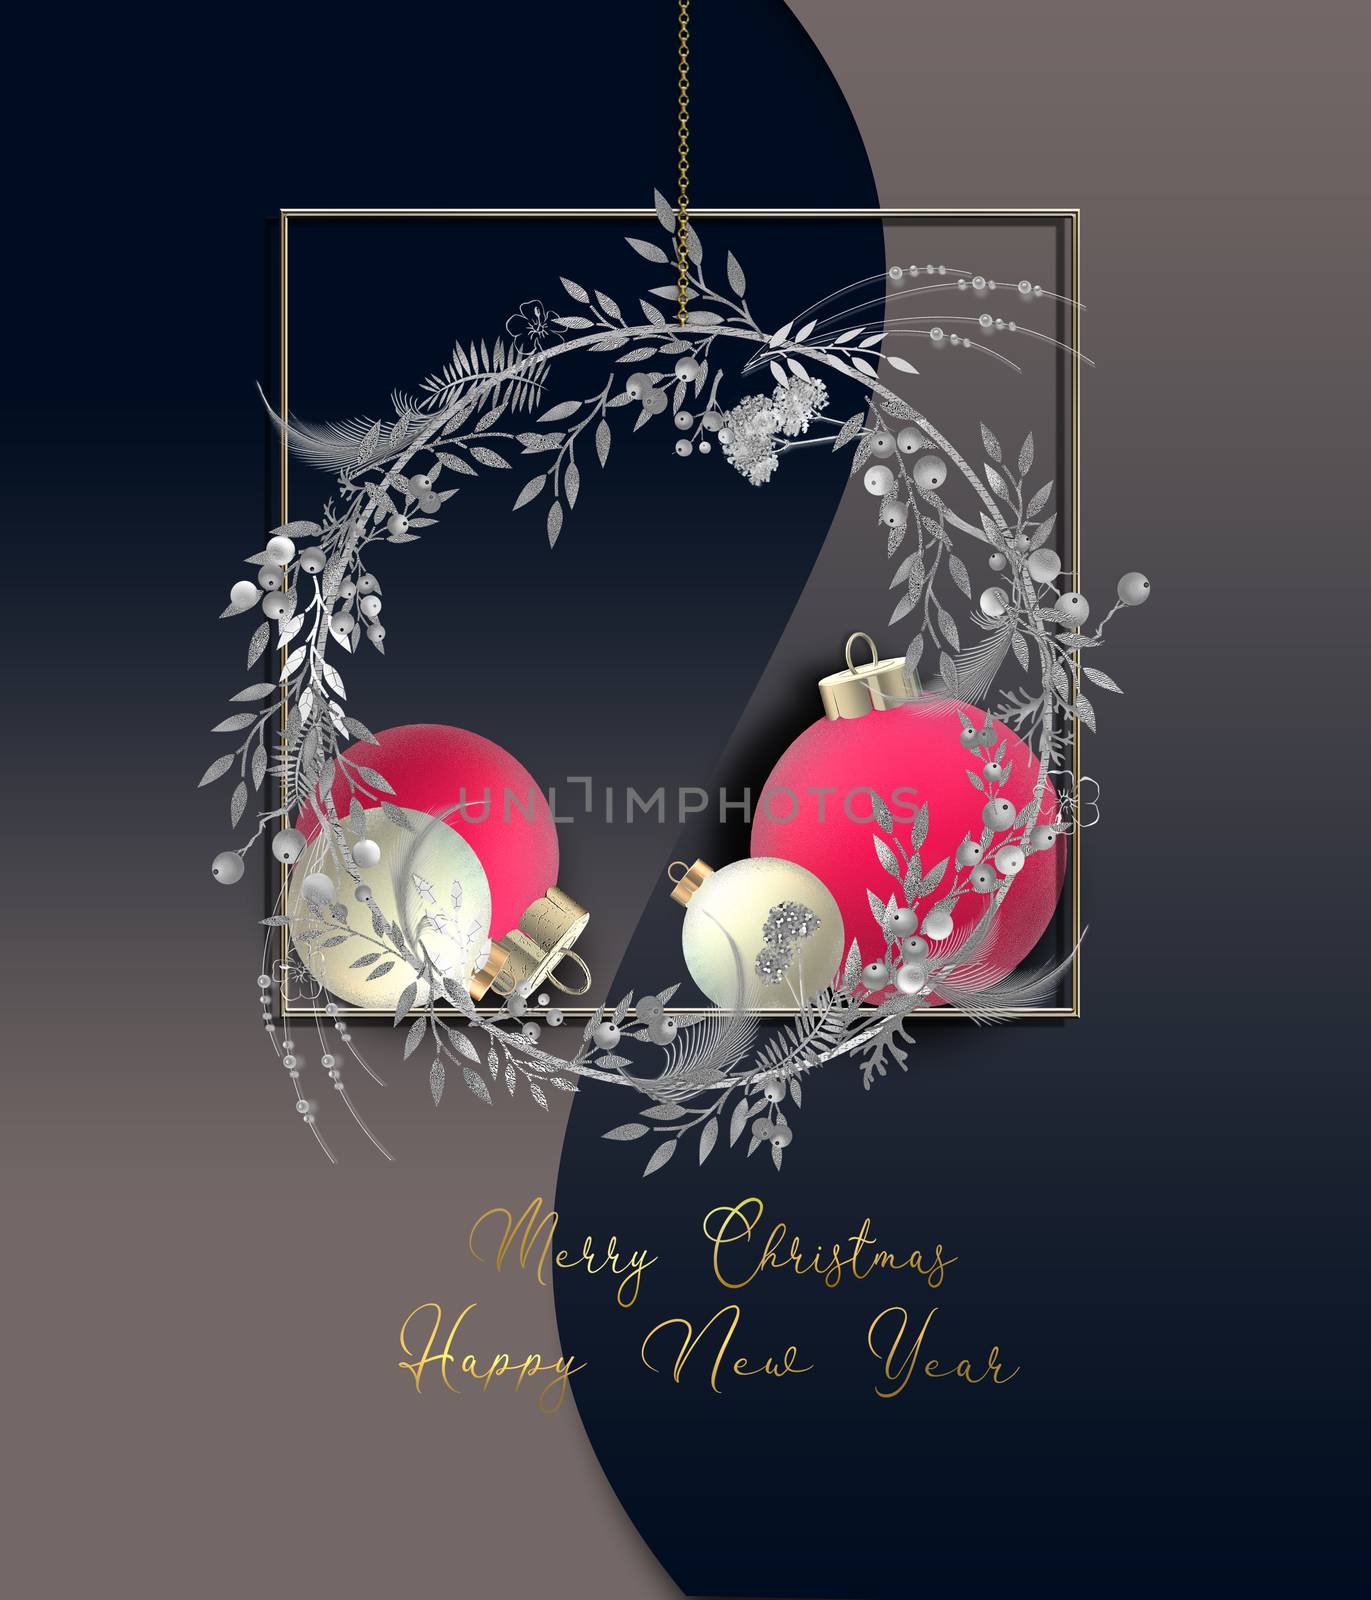 Christmas holiday invitation. Pink red Xmas balls baubles, Xmas wreath on blue black dramatic background. Gold text Merry Christmas Happy New Year. 3D render